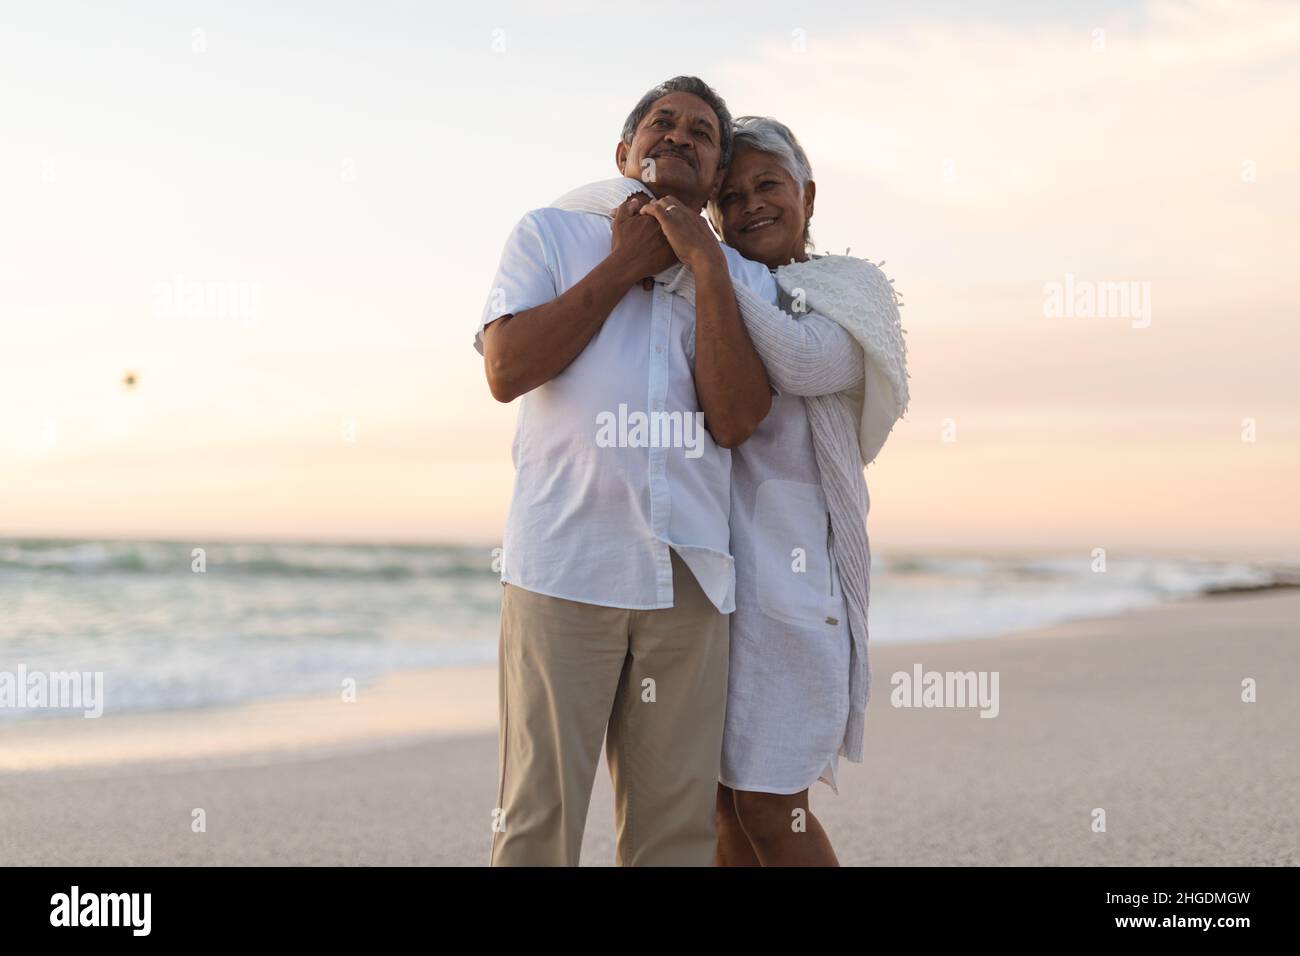 Happy newlywed senior multiracial couple embracing at beach against sky during sunset Stock Photo